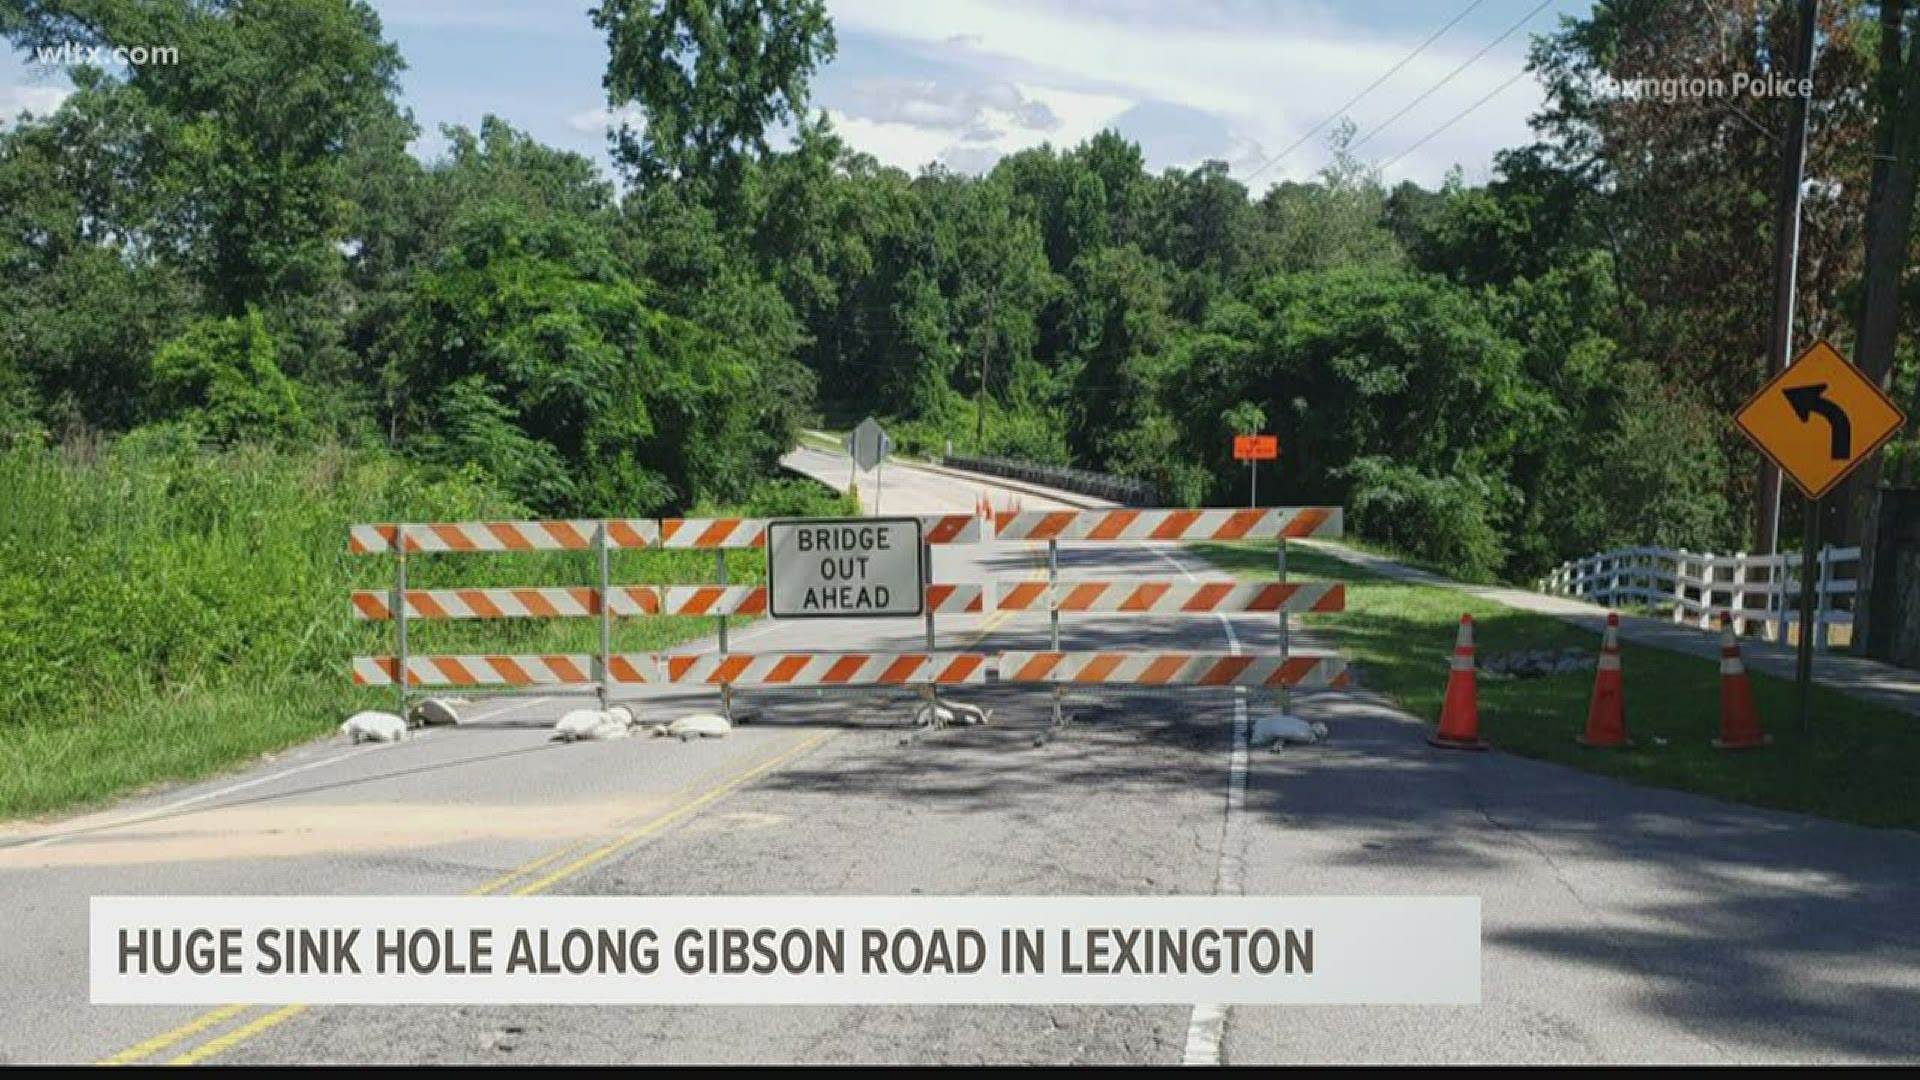 Officials are asking motorists to avoid the 200 block of Gibson road due to a 'massive' sinkhole.